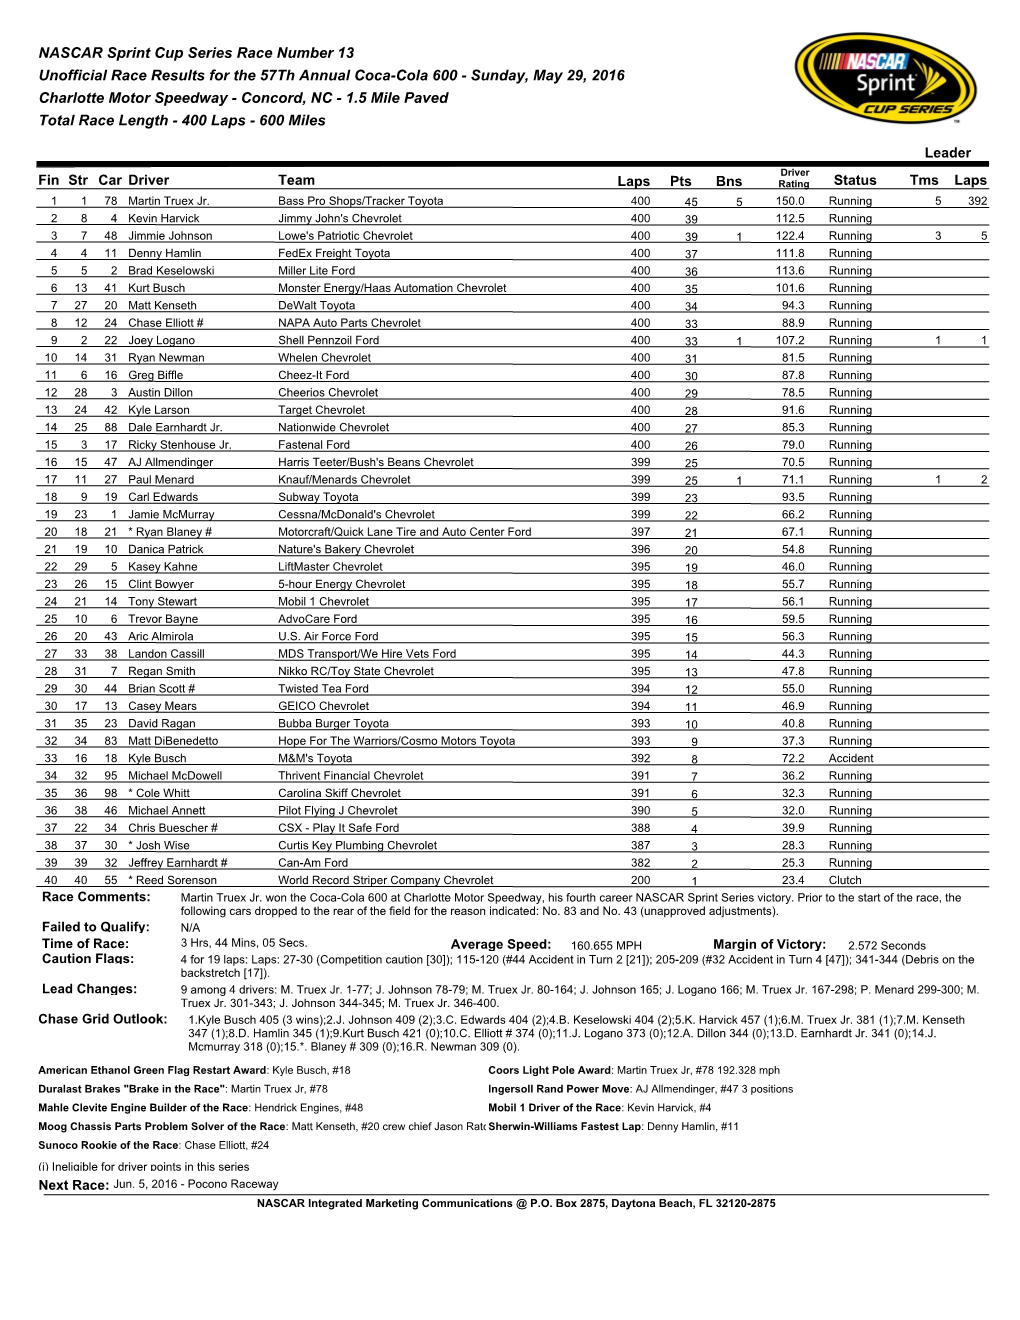 NASCAR Sprint Cup Series Race Number 13 Unofficial Race Results